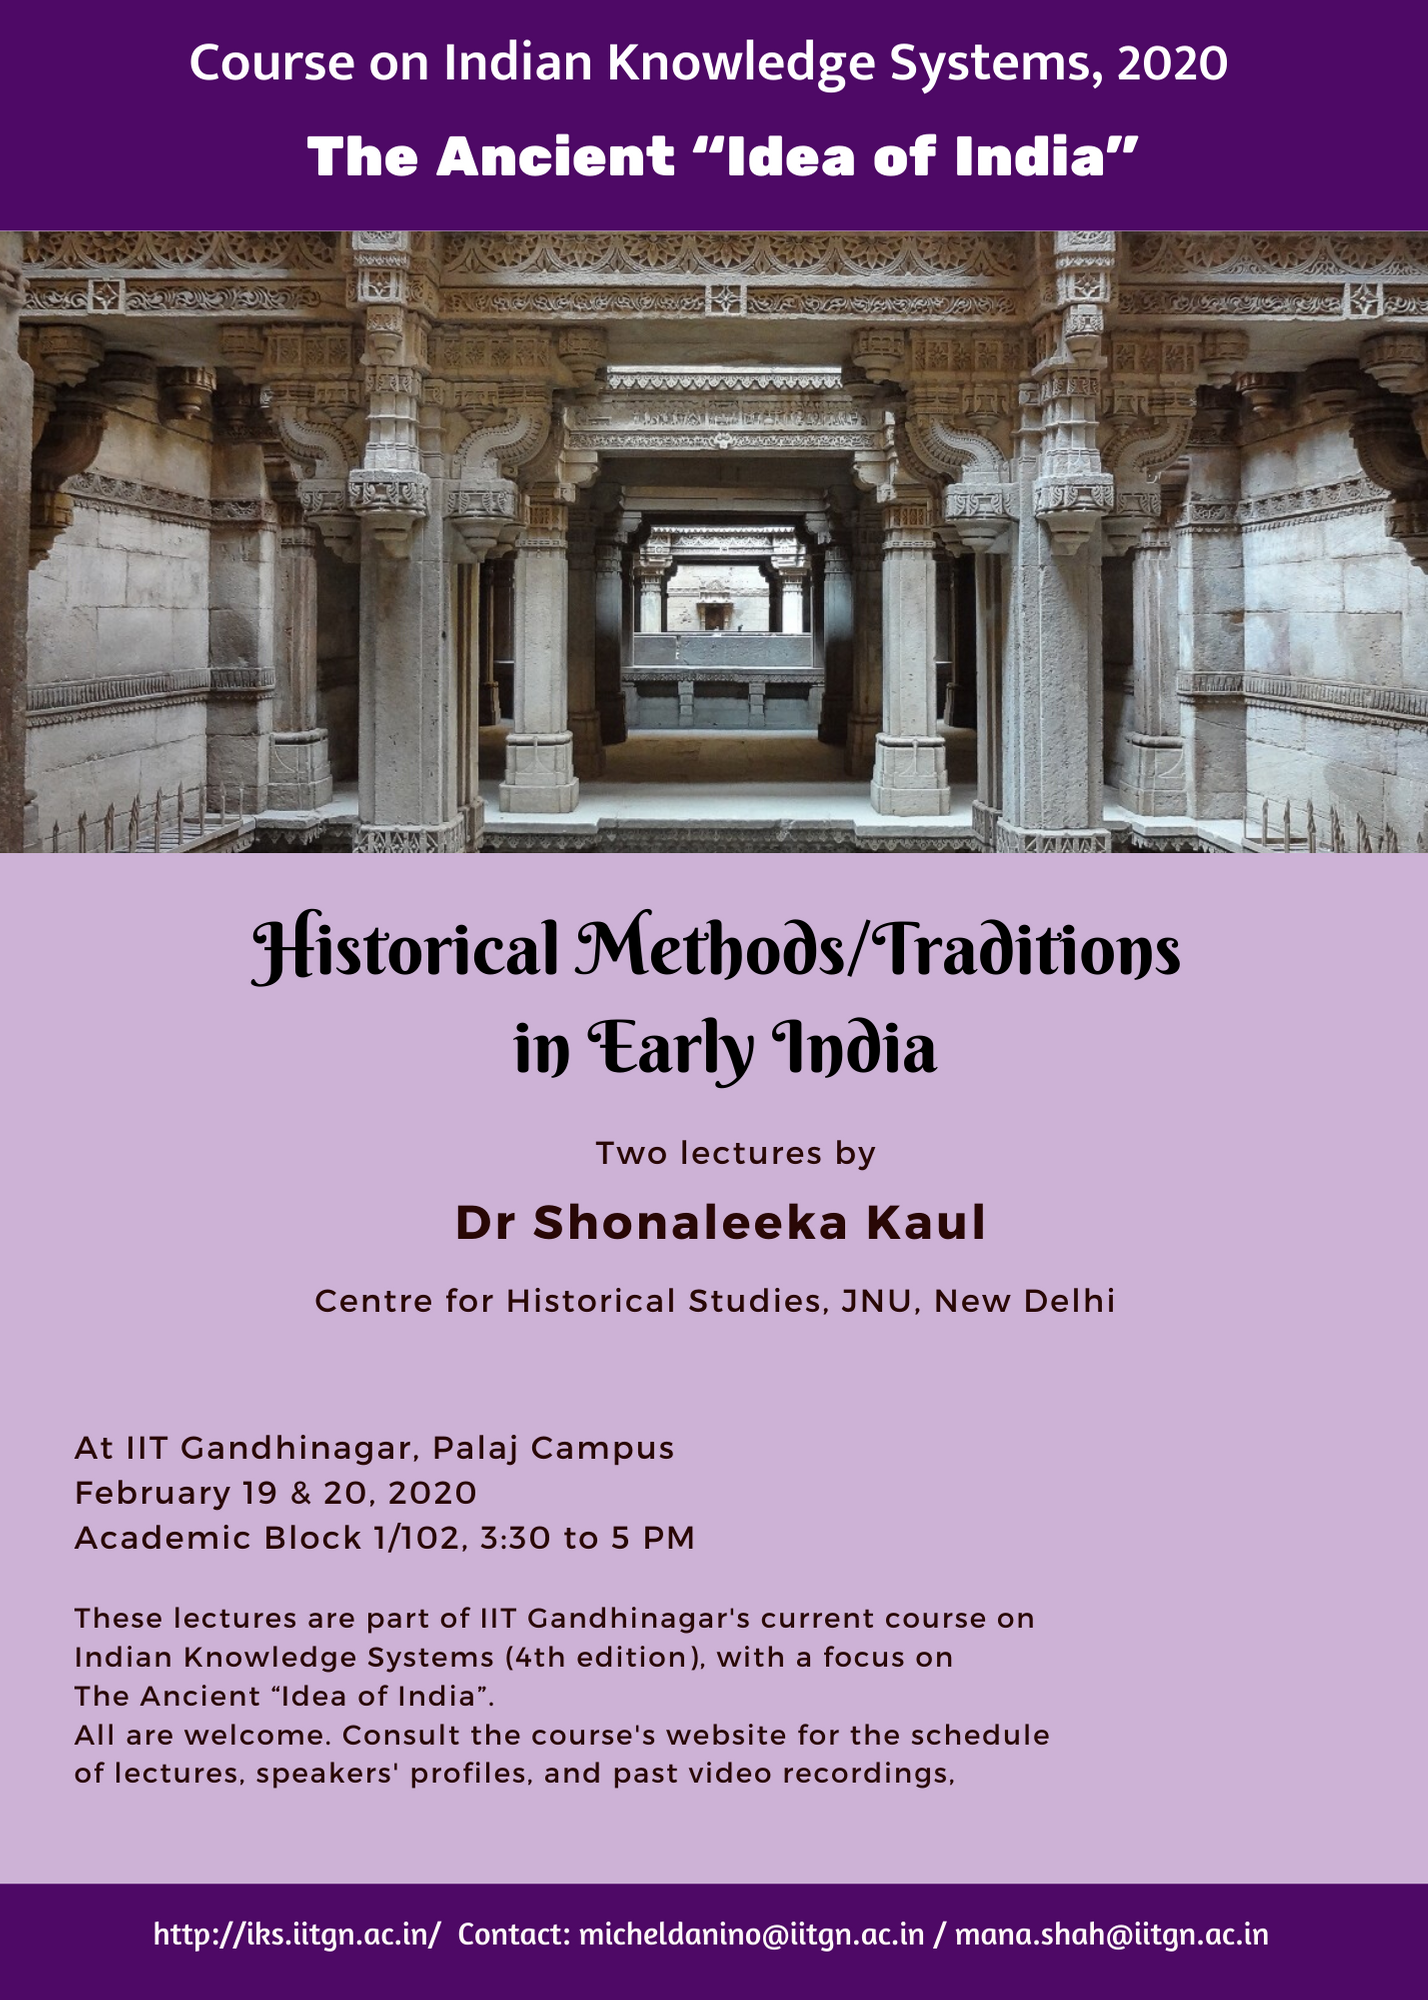 The next IKS lectures at IIT Gandhinagar will elucidate the ‘Historical Methods/Traditions in Early India’